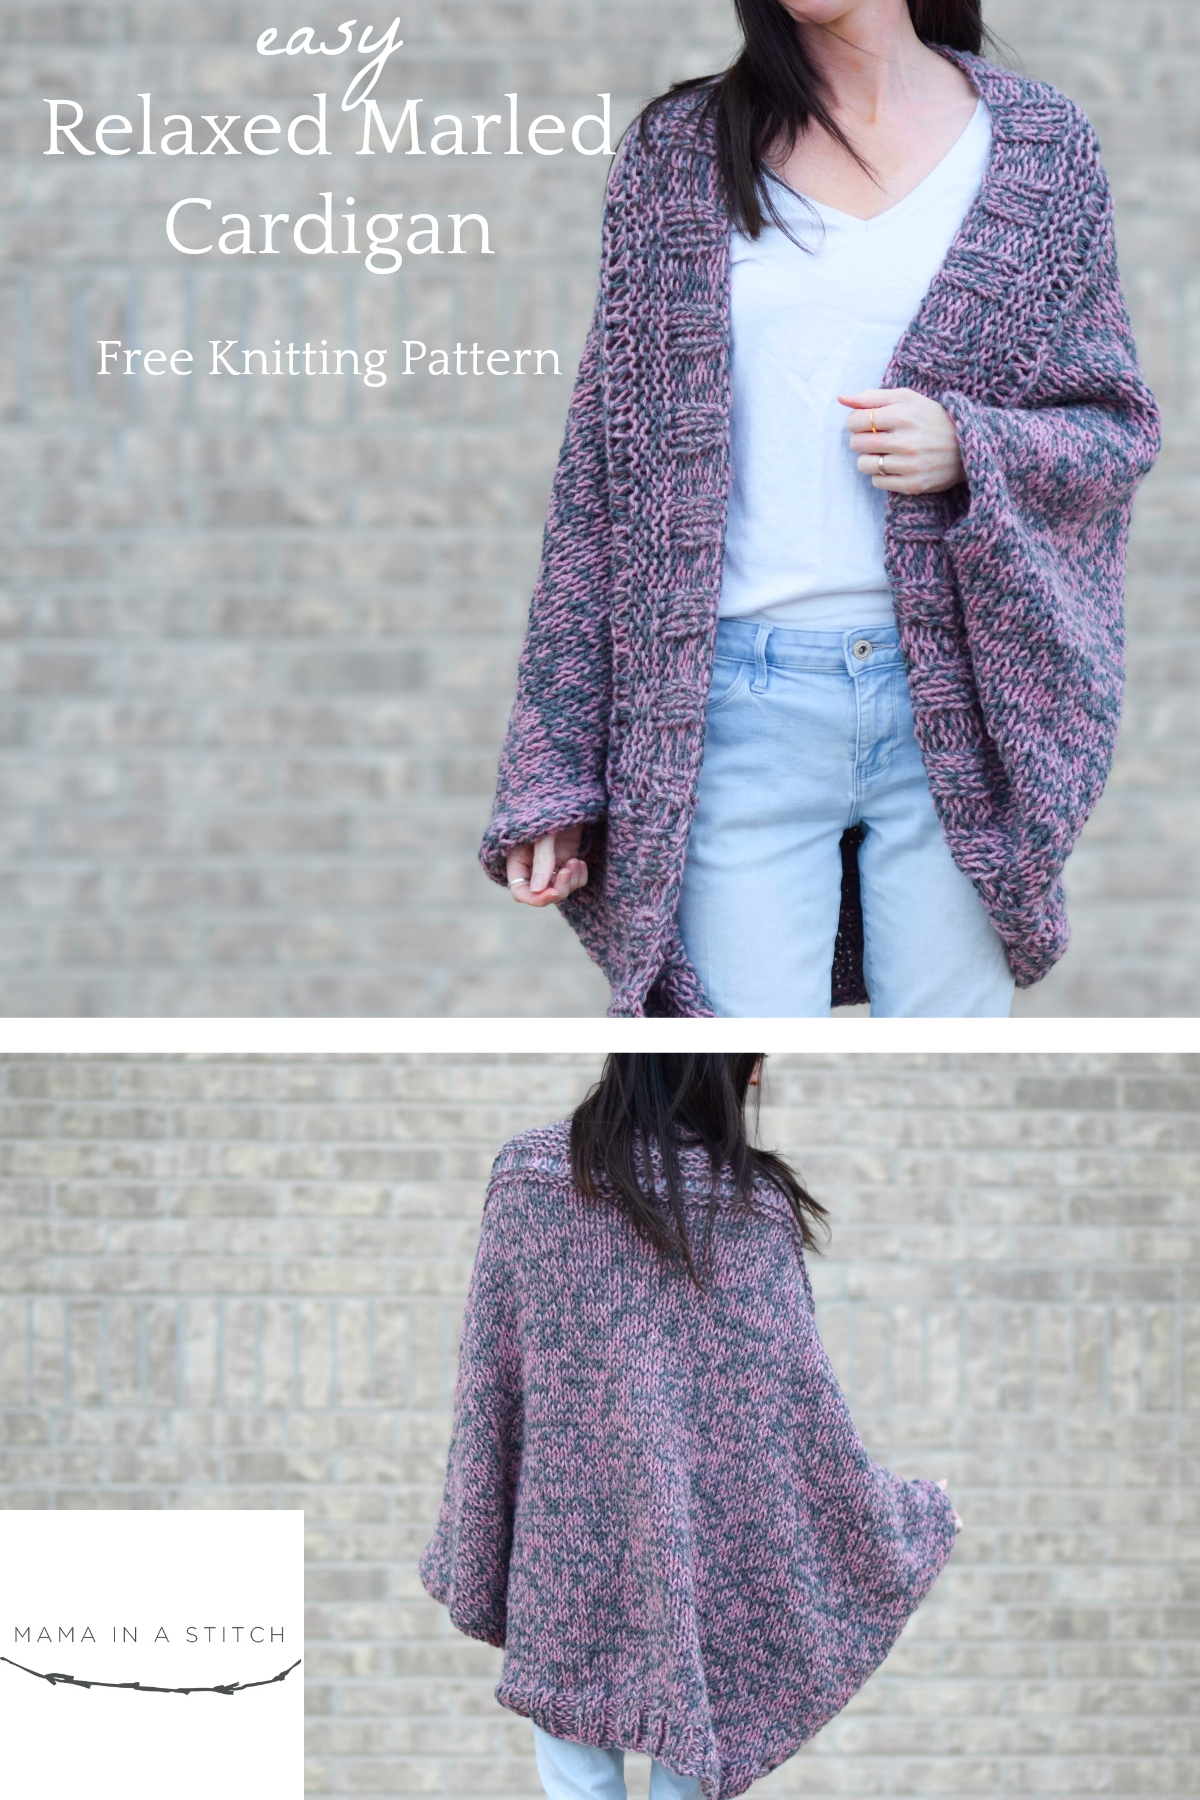 Free Knitted Cardigan Patterns Easy Relaxed Marled Cardigan Knitting Pattern Mama In A Stitch